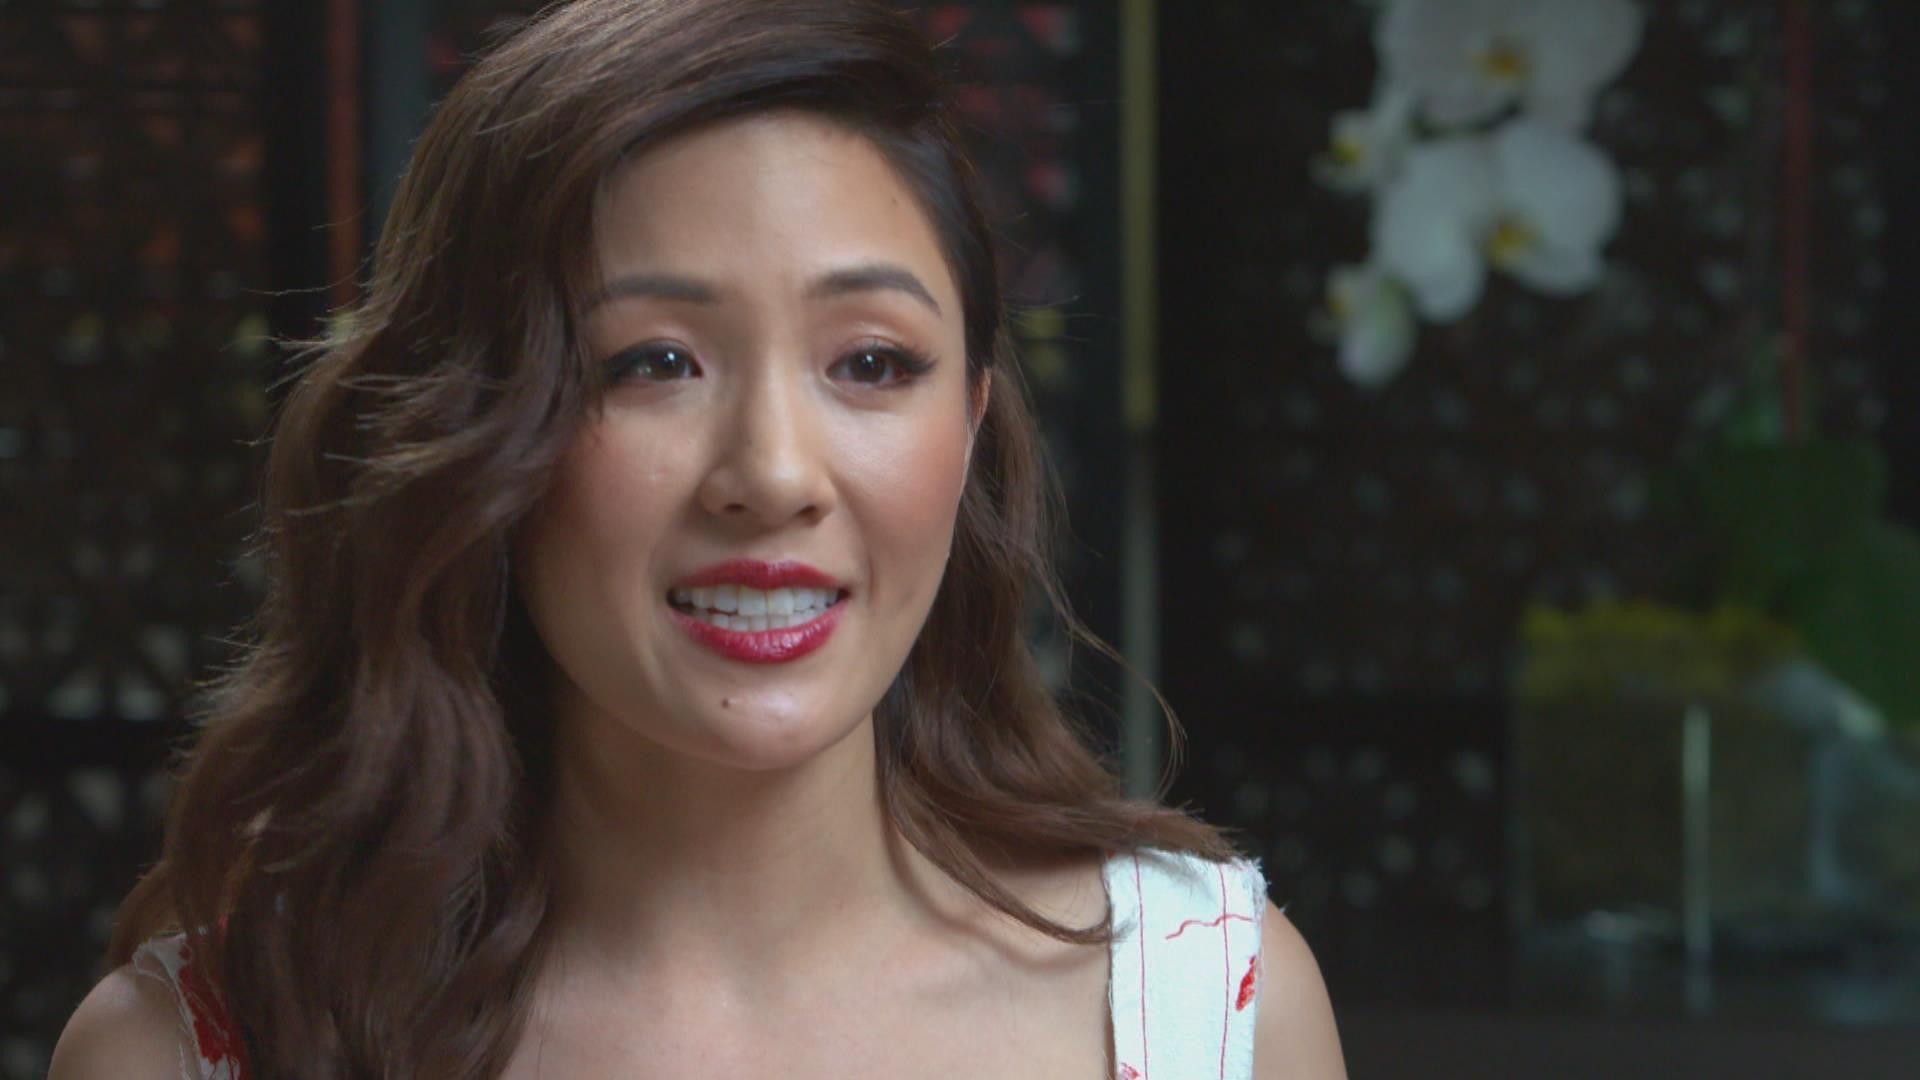 Extended interview: 'Crazy Rich Asians' actors and director discuss